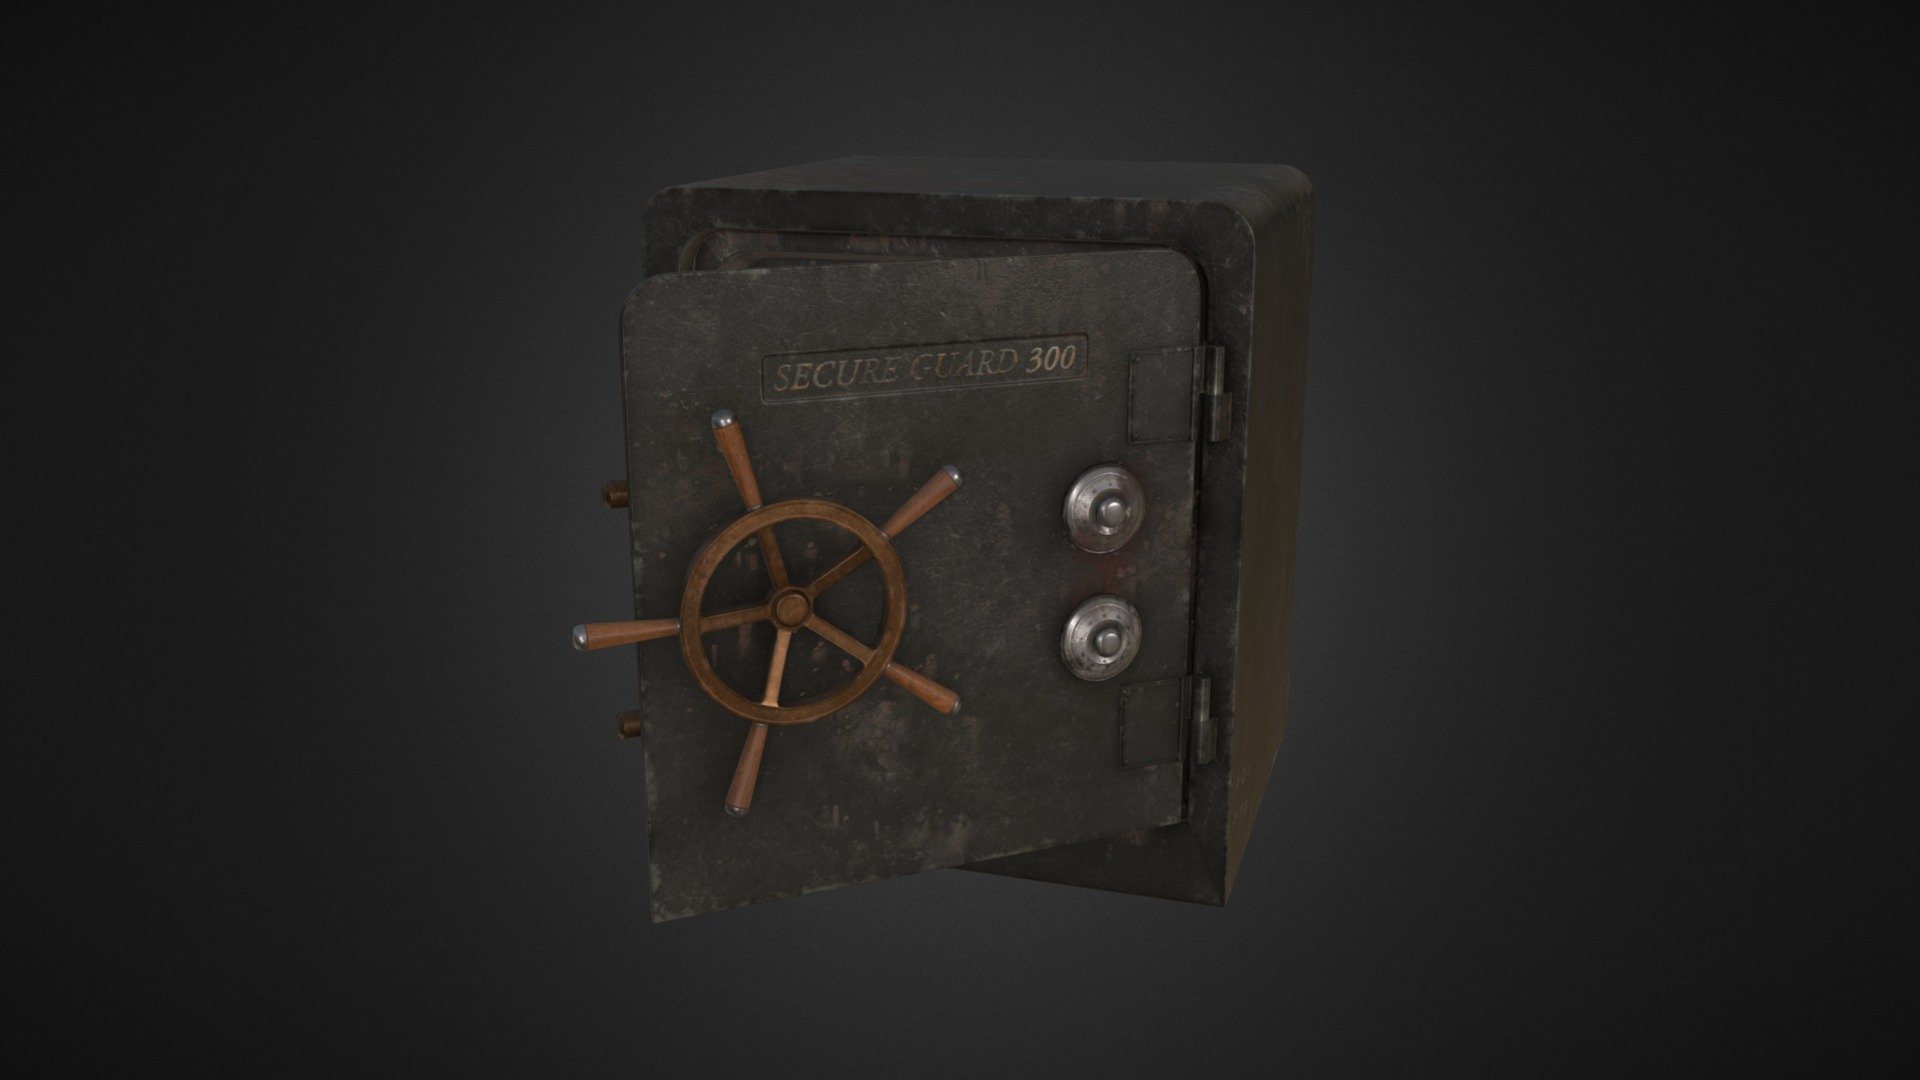 Safe model created in Maya, and textured in Substance Painter.. This safe is inspired by the Fallout series, as well as real safes 3d model